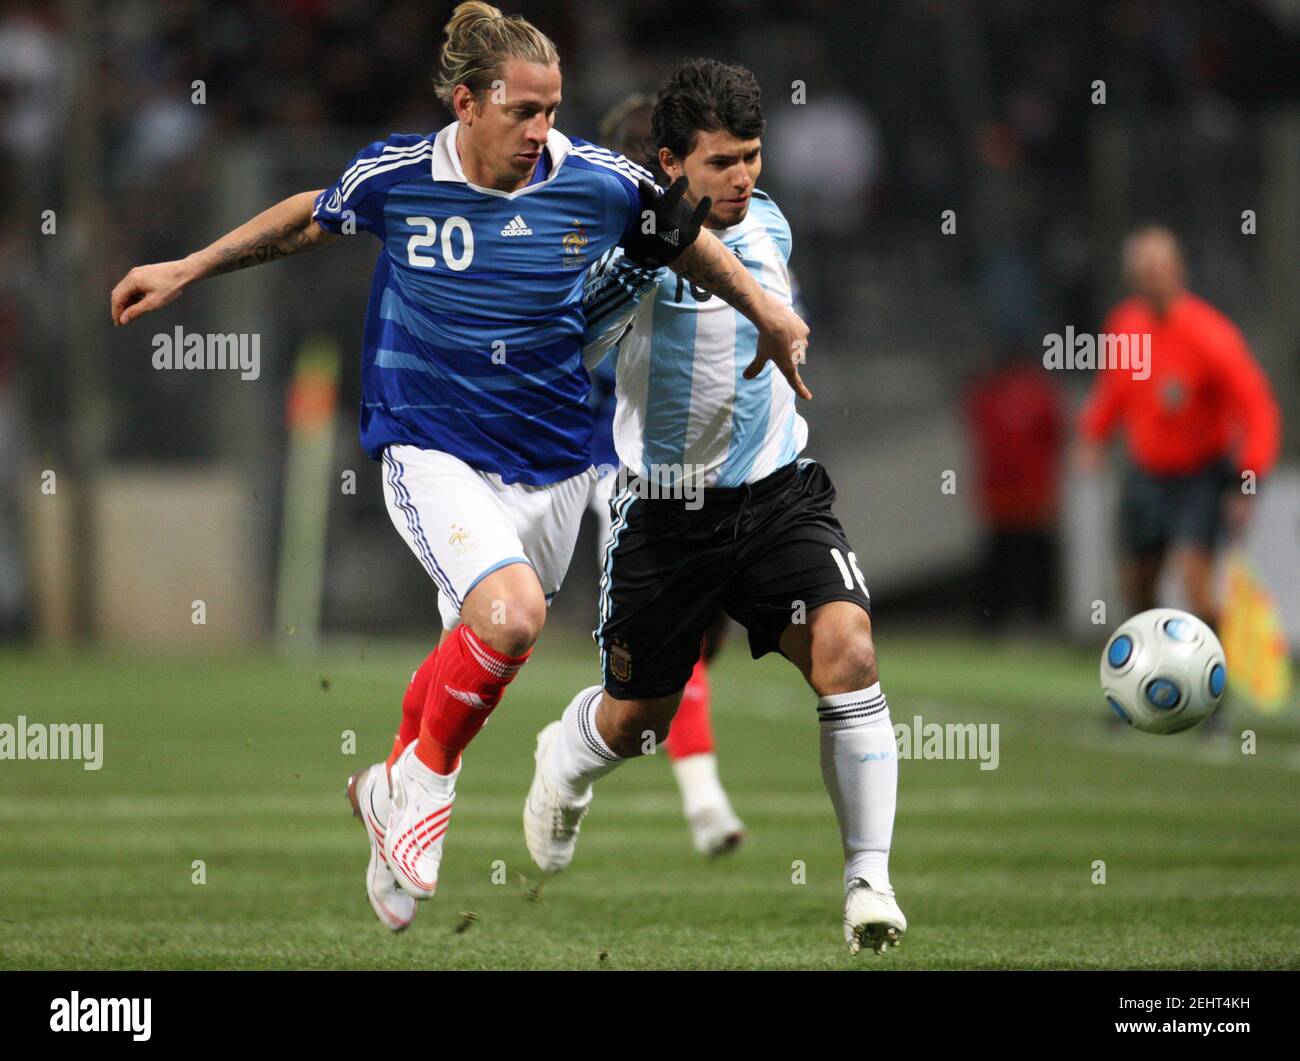 Football - France v Argentina - International Friendly - Stade Velodrome,  Marseille, France - 11/2/09 France's Philippe Mexes in action against  Argentina's Sergio Aguero (R) Mandatory Credit: Action Images / Andrew  Couldridge Stock Photo - Alamy